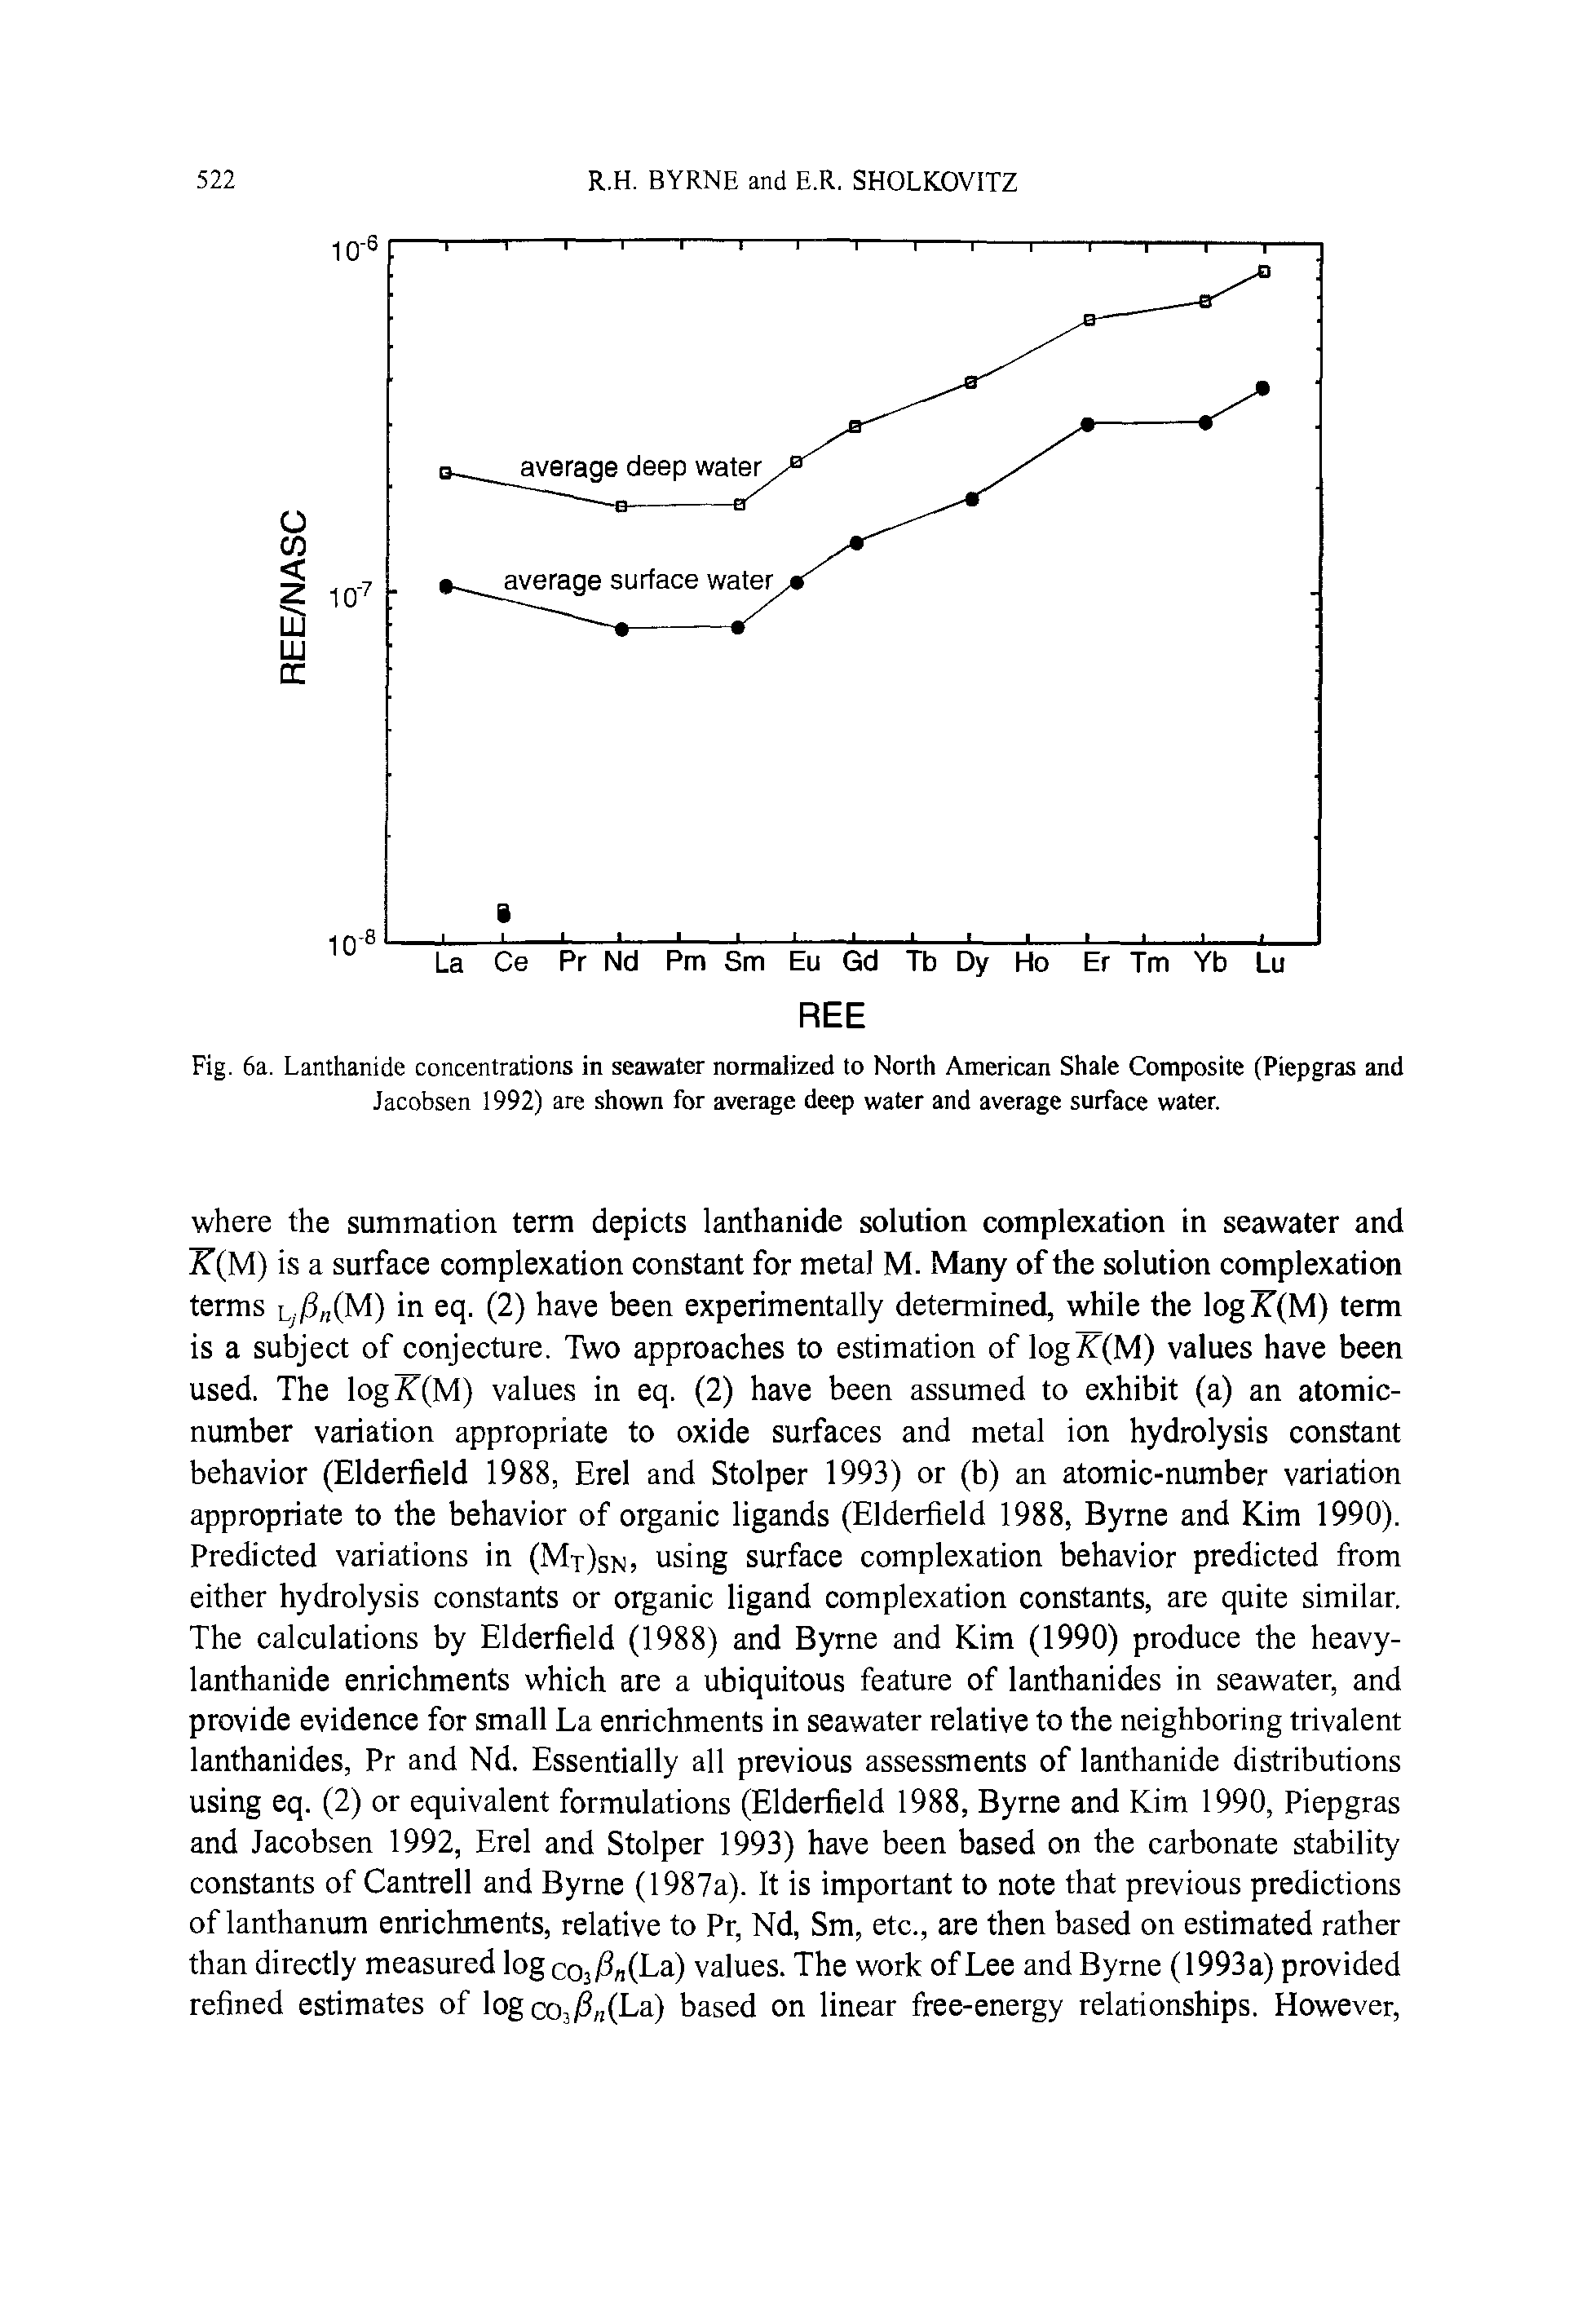 Fig. 6a. Lanthanide concentrations in seawater normalized to North American Shale Composite (Piepgras and Jacobsen 1992) are shown for average deep water and average surface water.